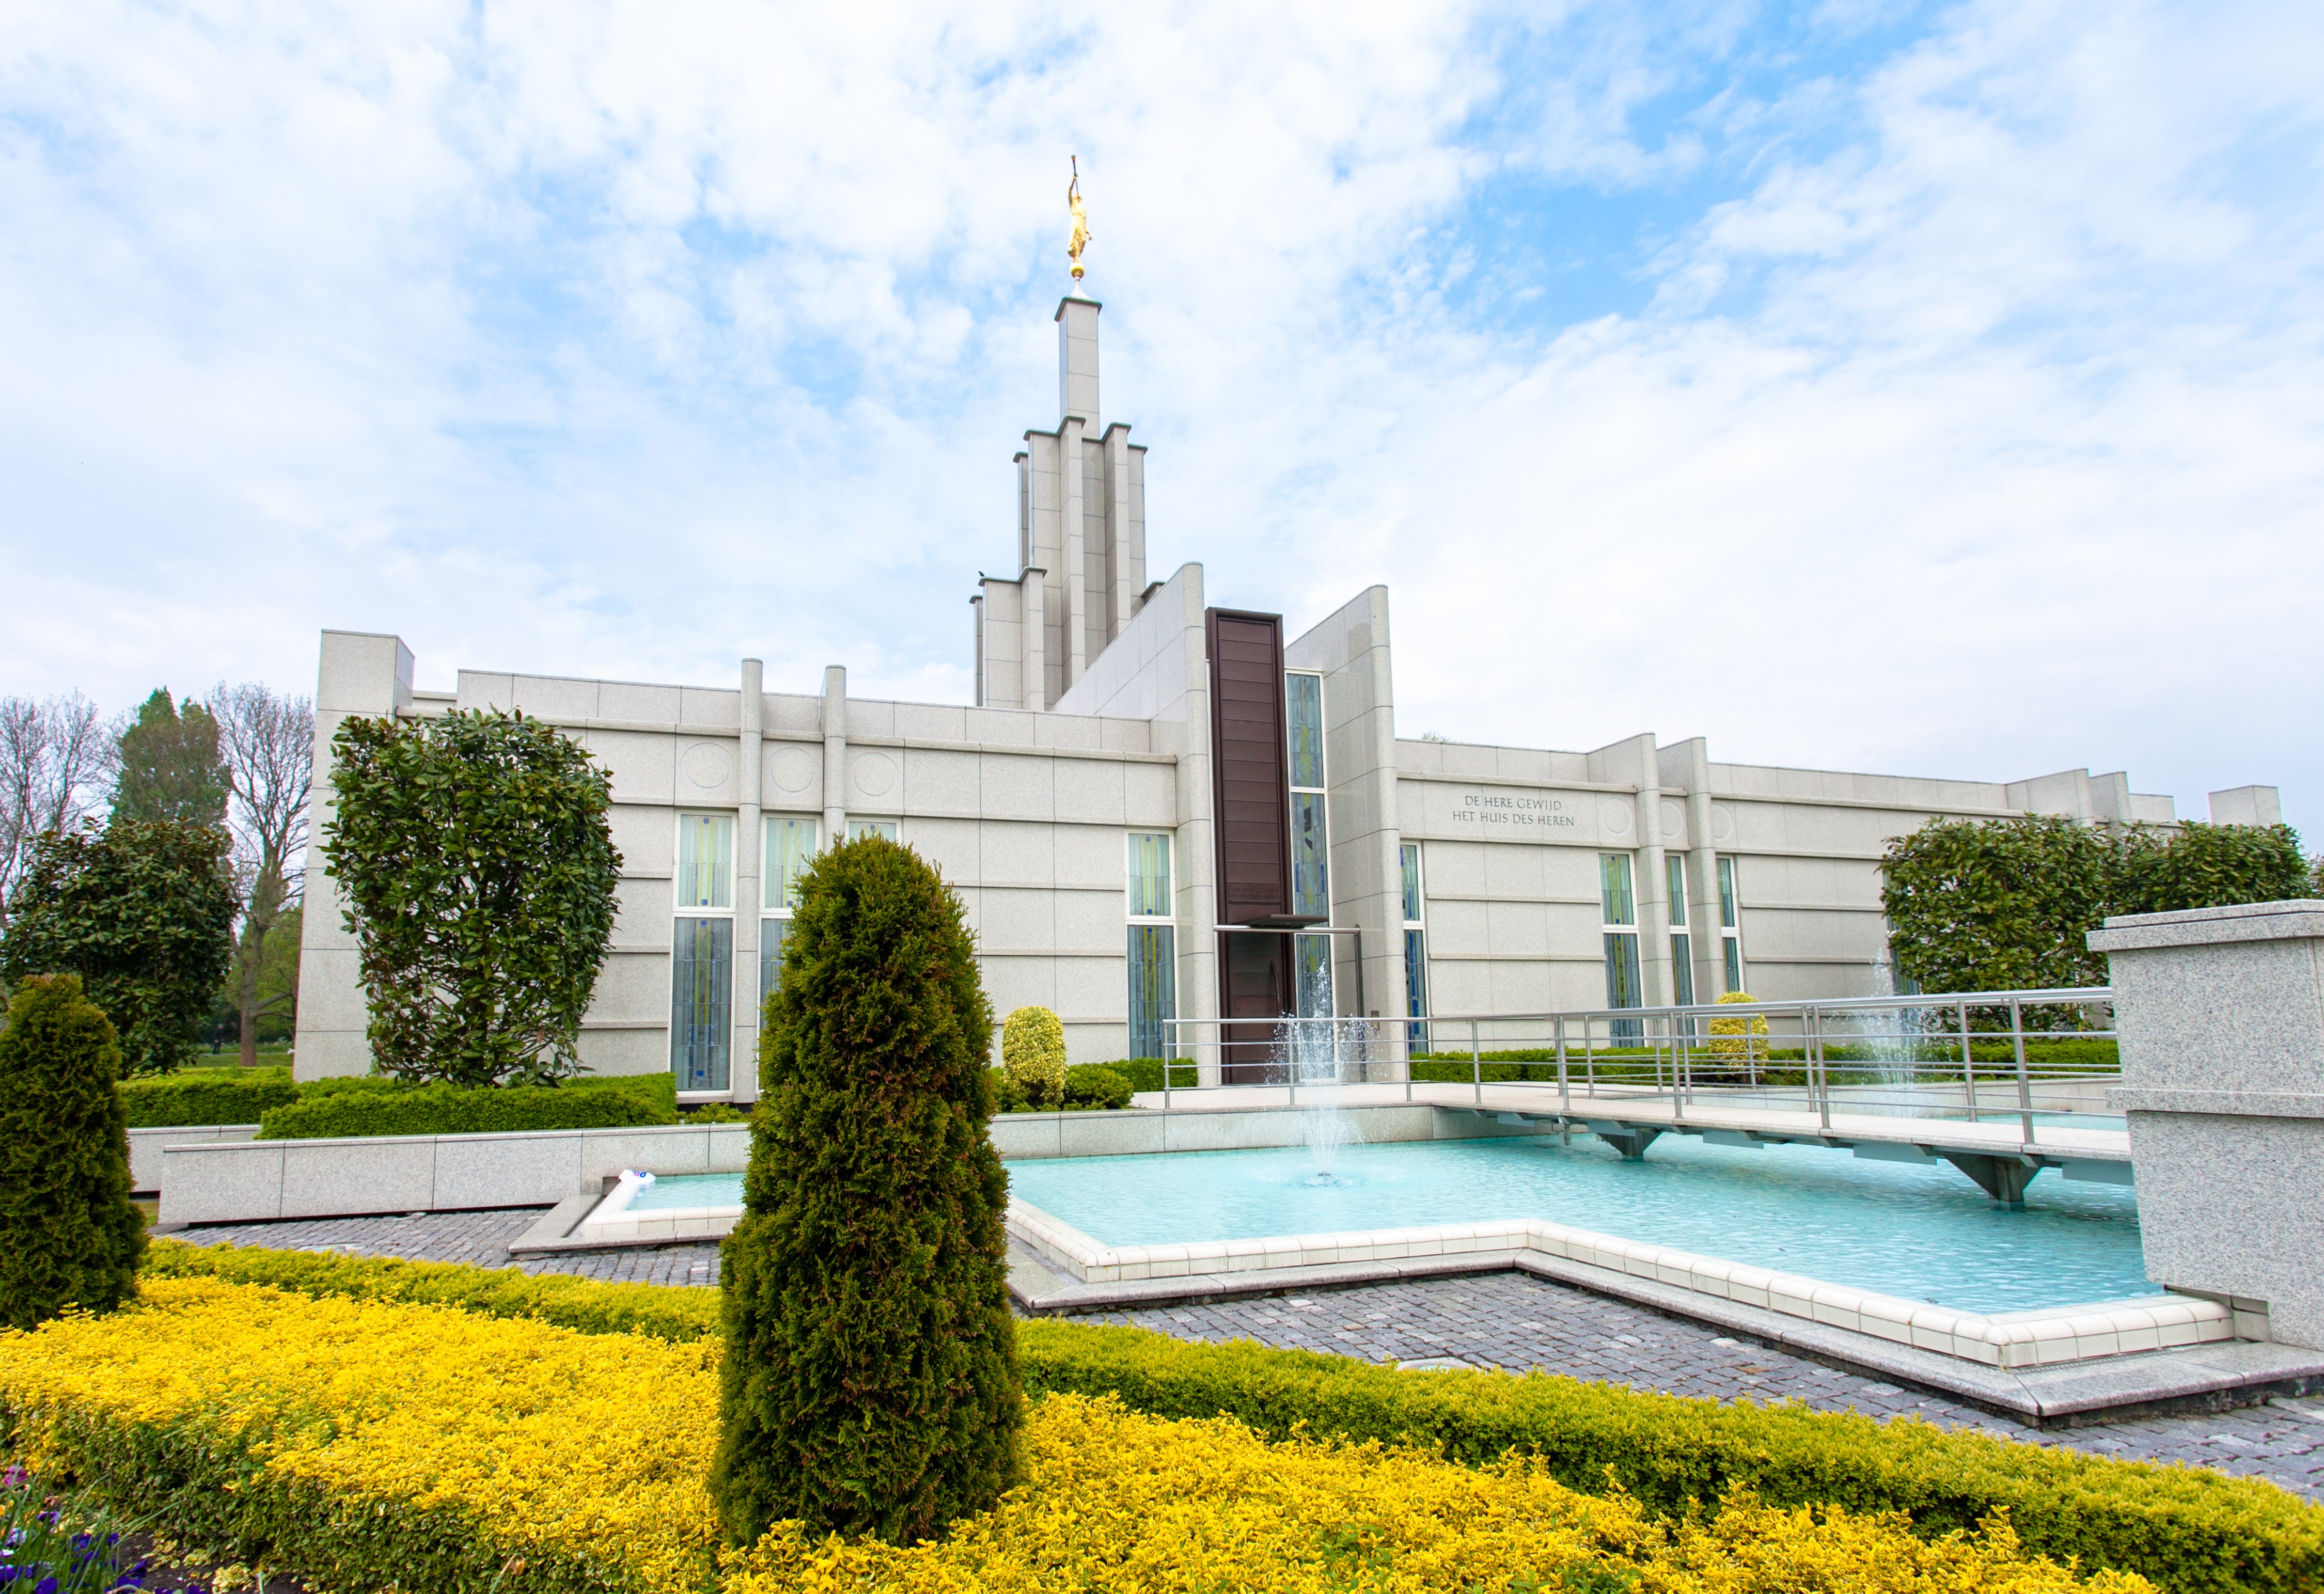 The Hague Netherlands Temple, a white building with a spire topped by a golden statue of an angel blowing a trumpet.